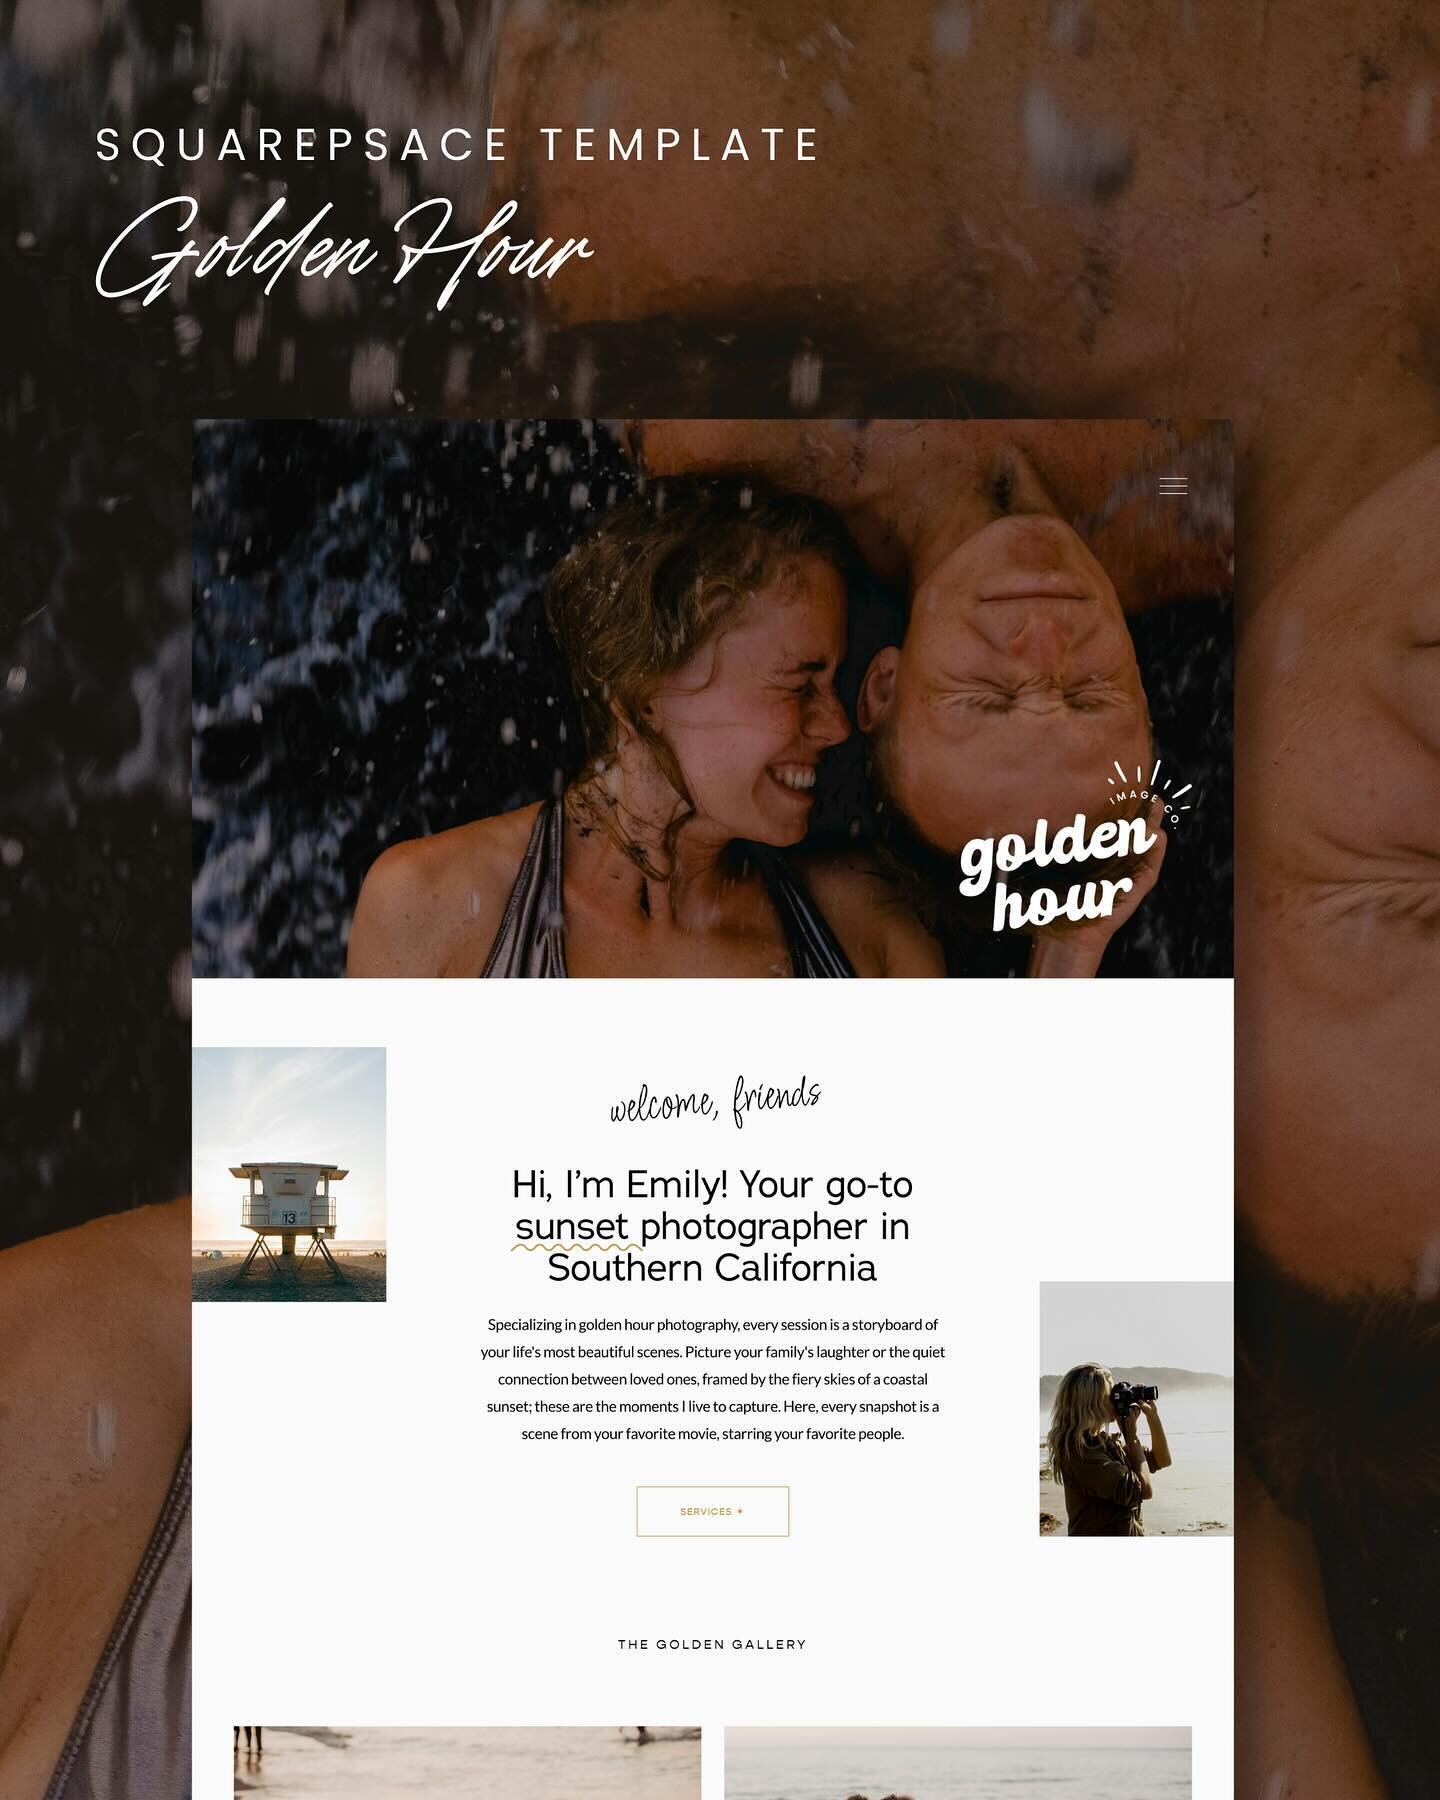 Step into the spotlight with Golden Hour ☀️, a premium Squarespace website template for photographers and creatives who radiate warmth and creativity.

Vibrant / Clean / Contemporary

The Golden Hour template features crisp layouts, a warm colour pal